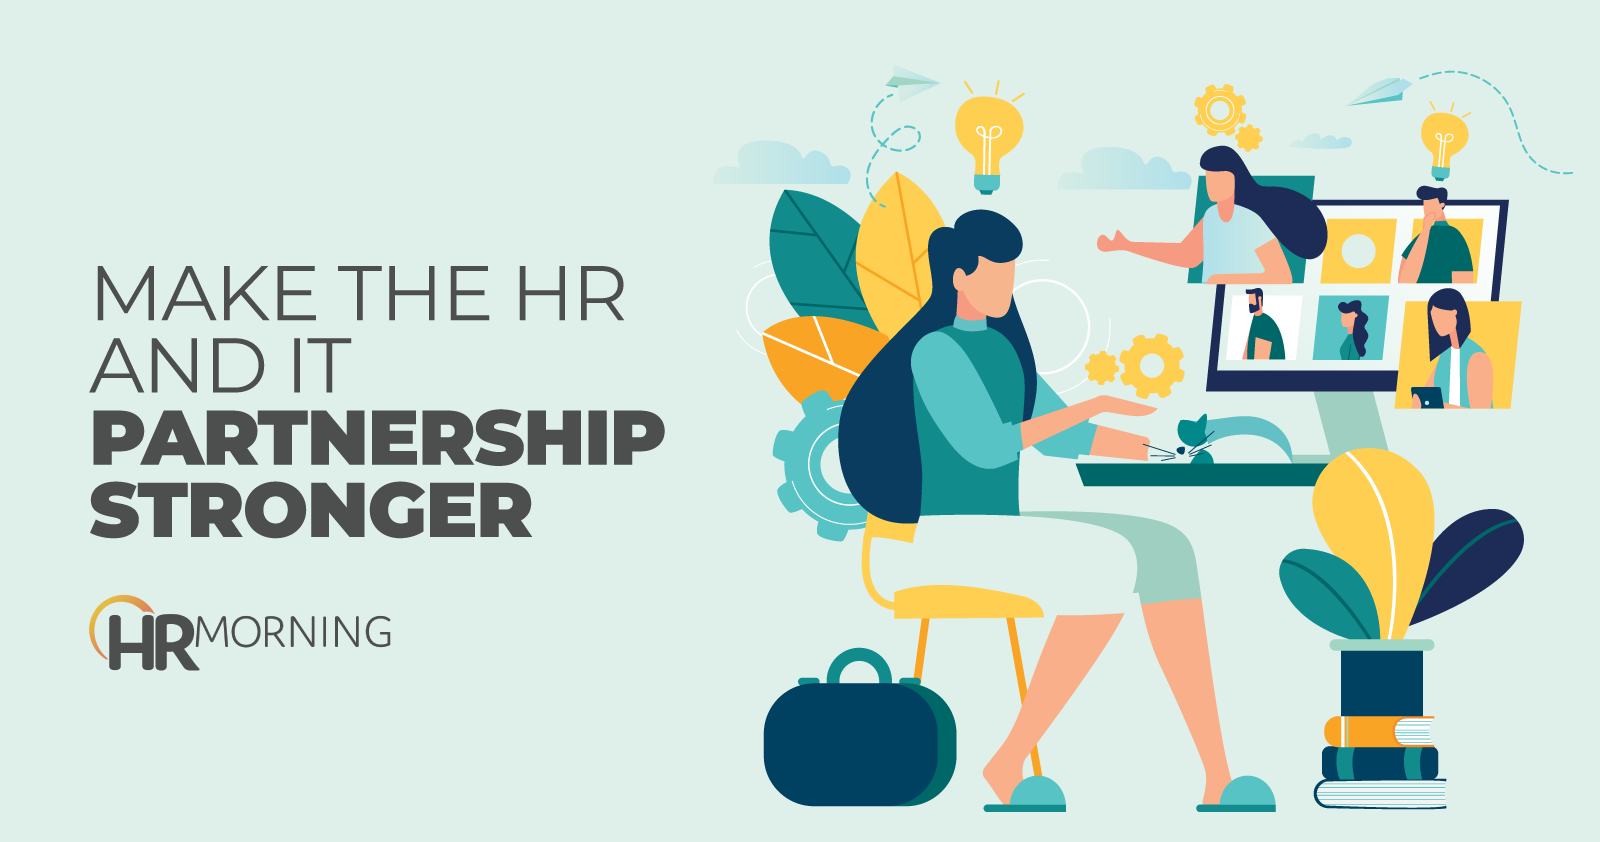 Make The HR And IT Partnership Stronger